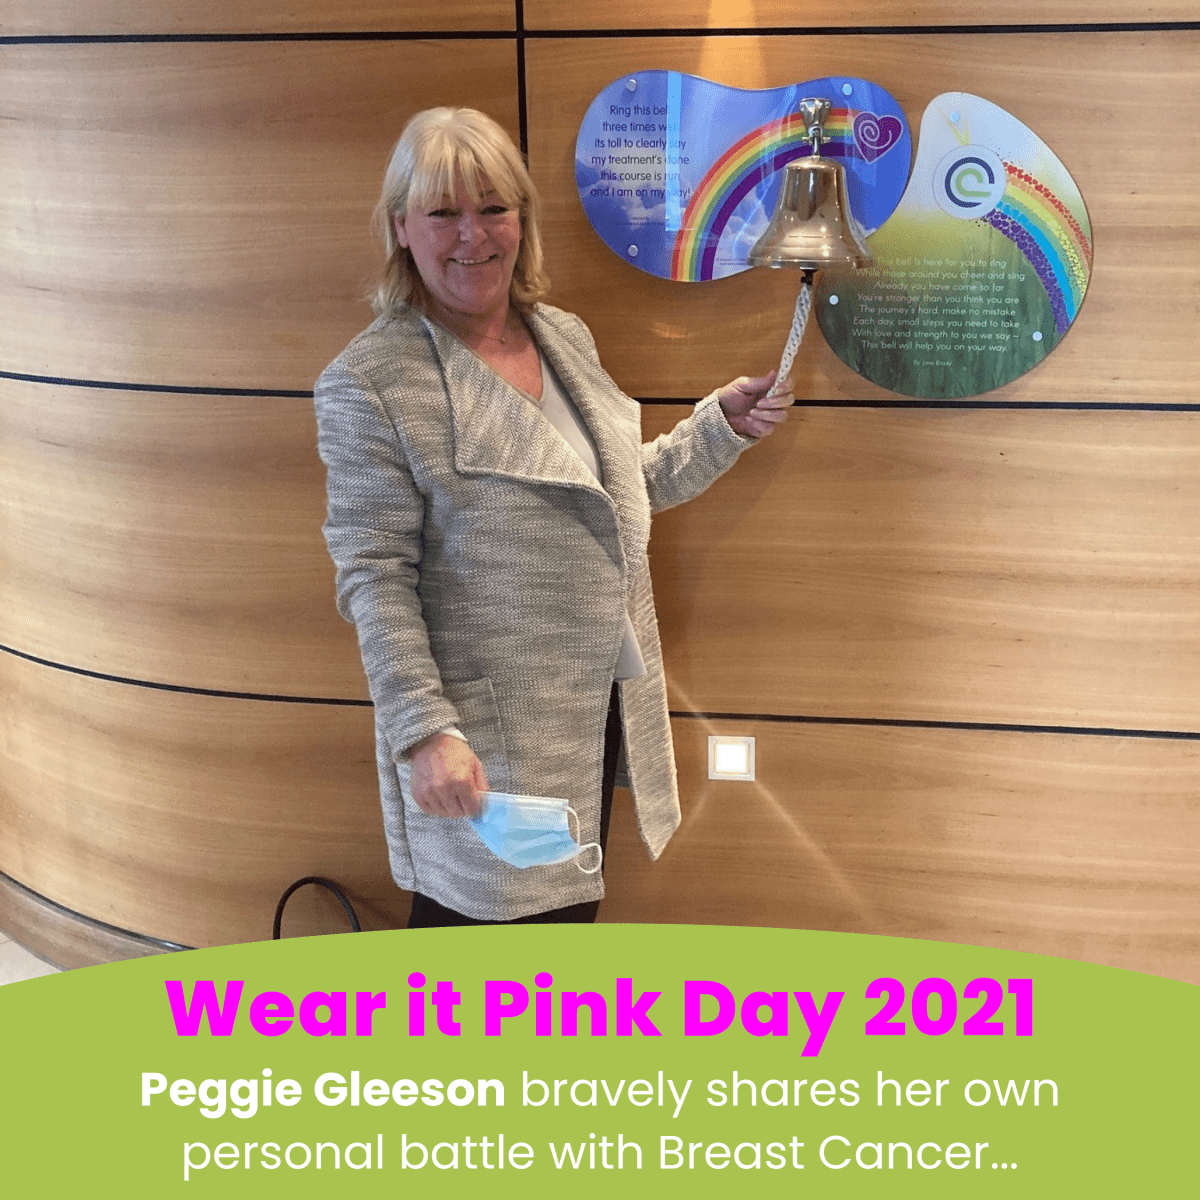 Peggie Gleeson bravely shares her own personal battle with breast cancer…